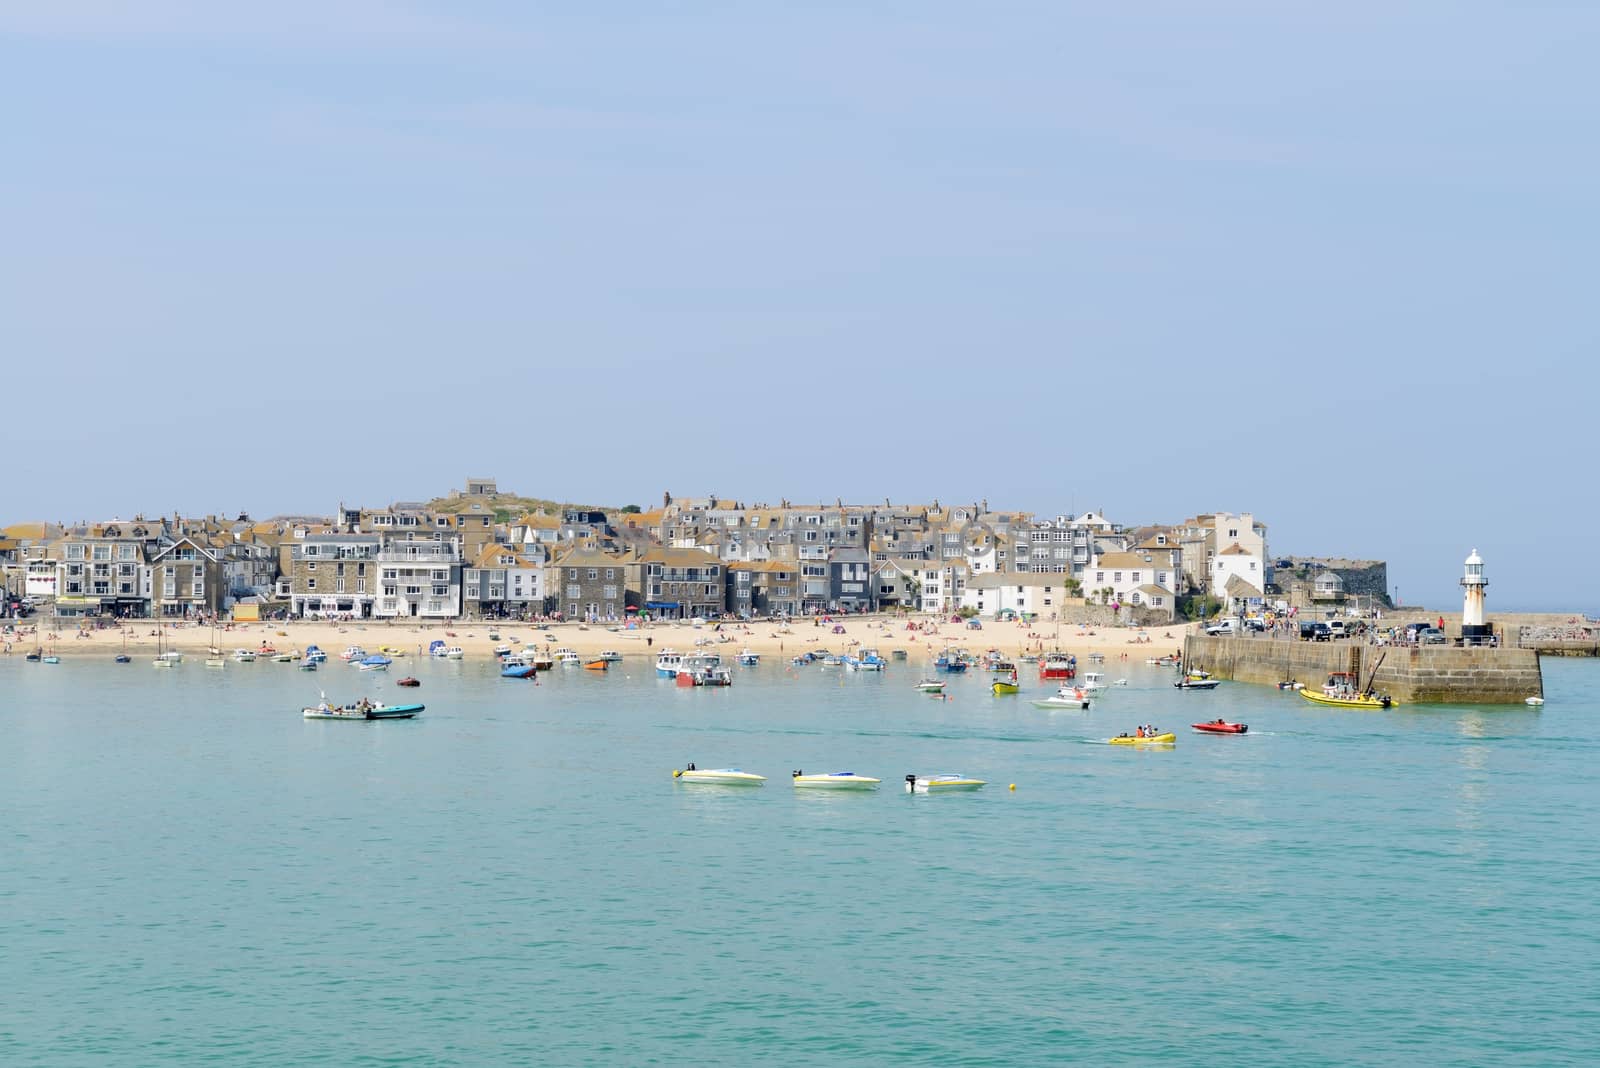 St Ives in Cornwall, England. Showing harbour with fishing boats on a sunny day in the summer.